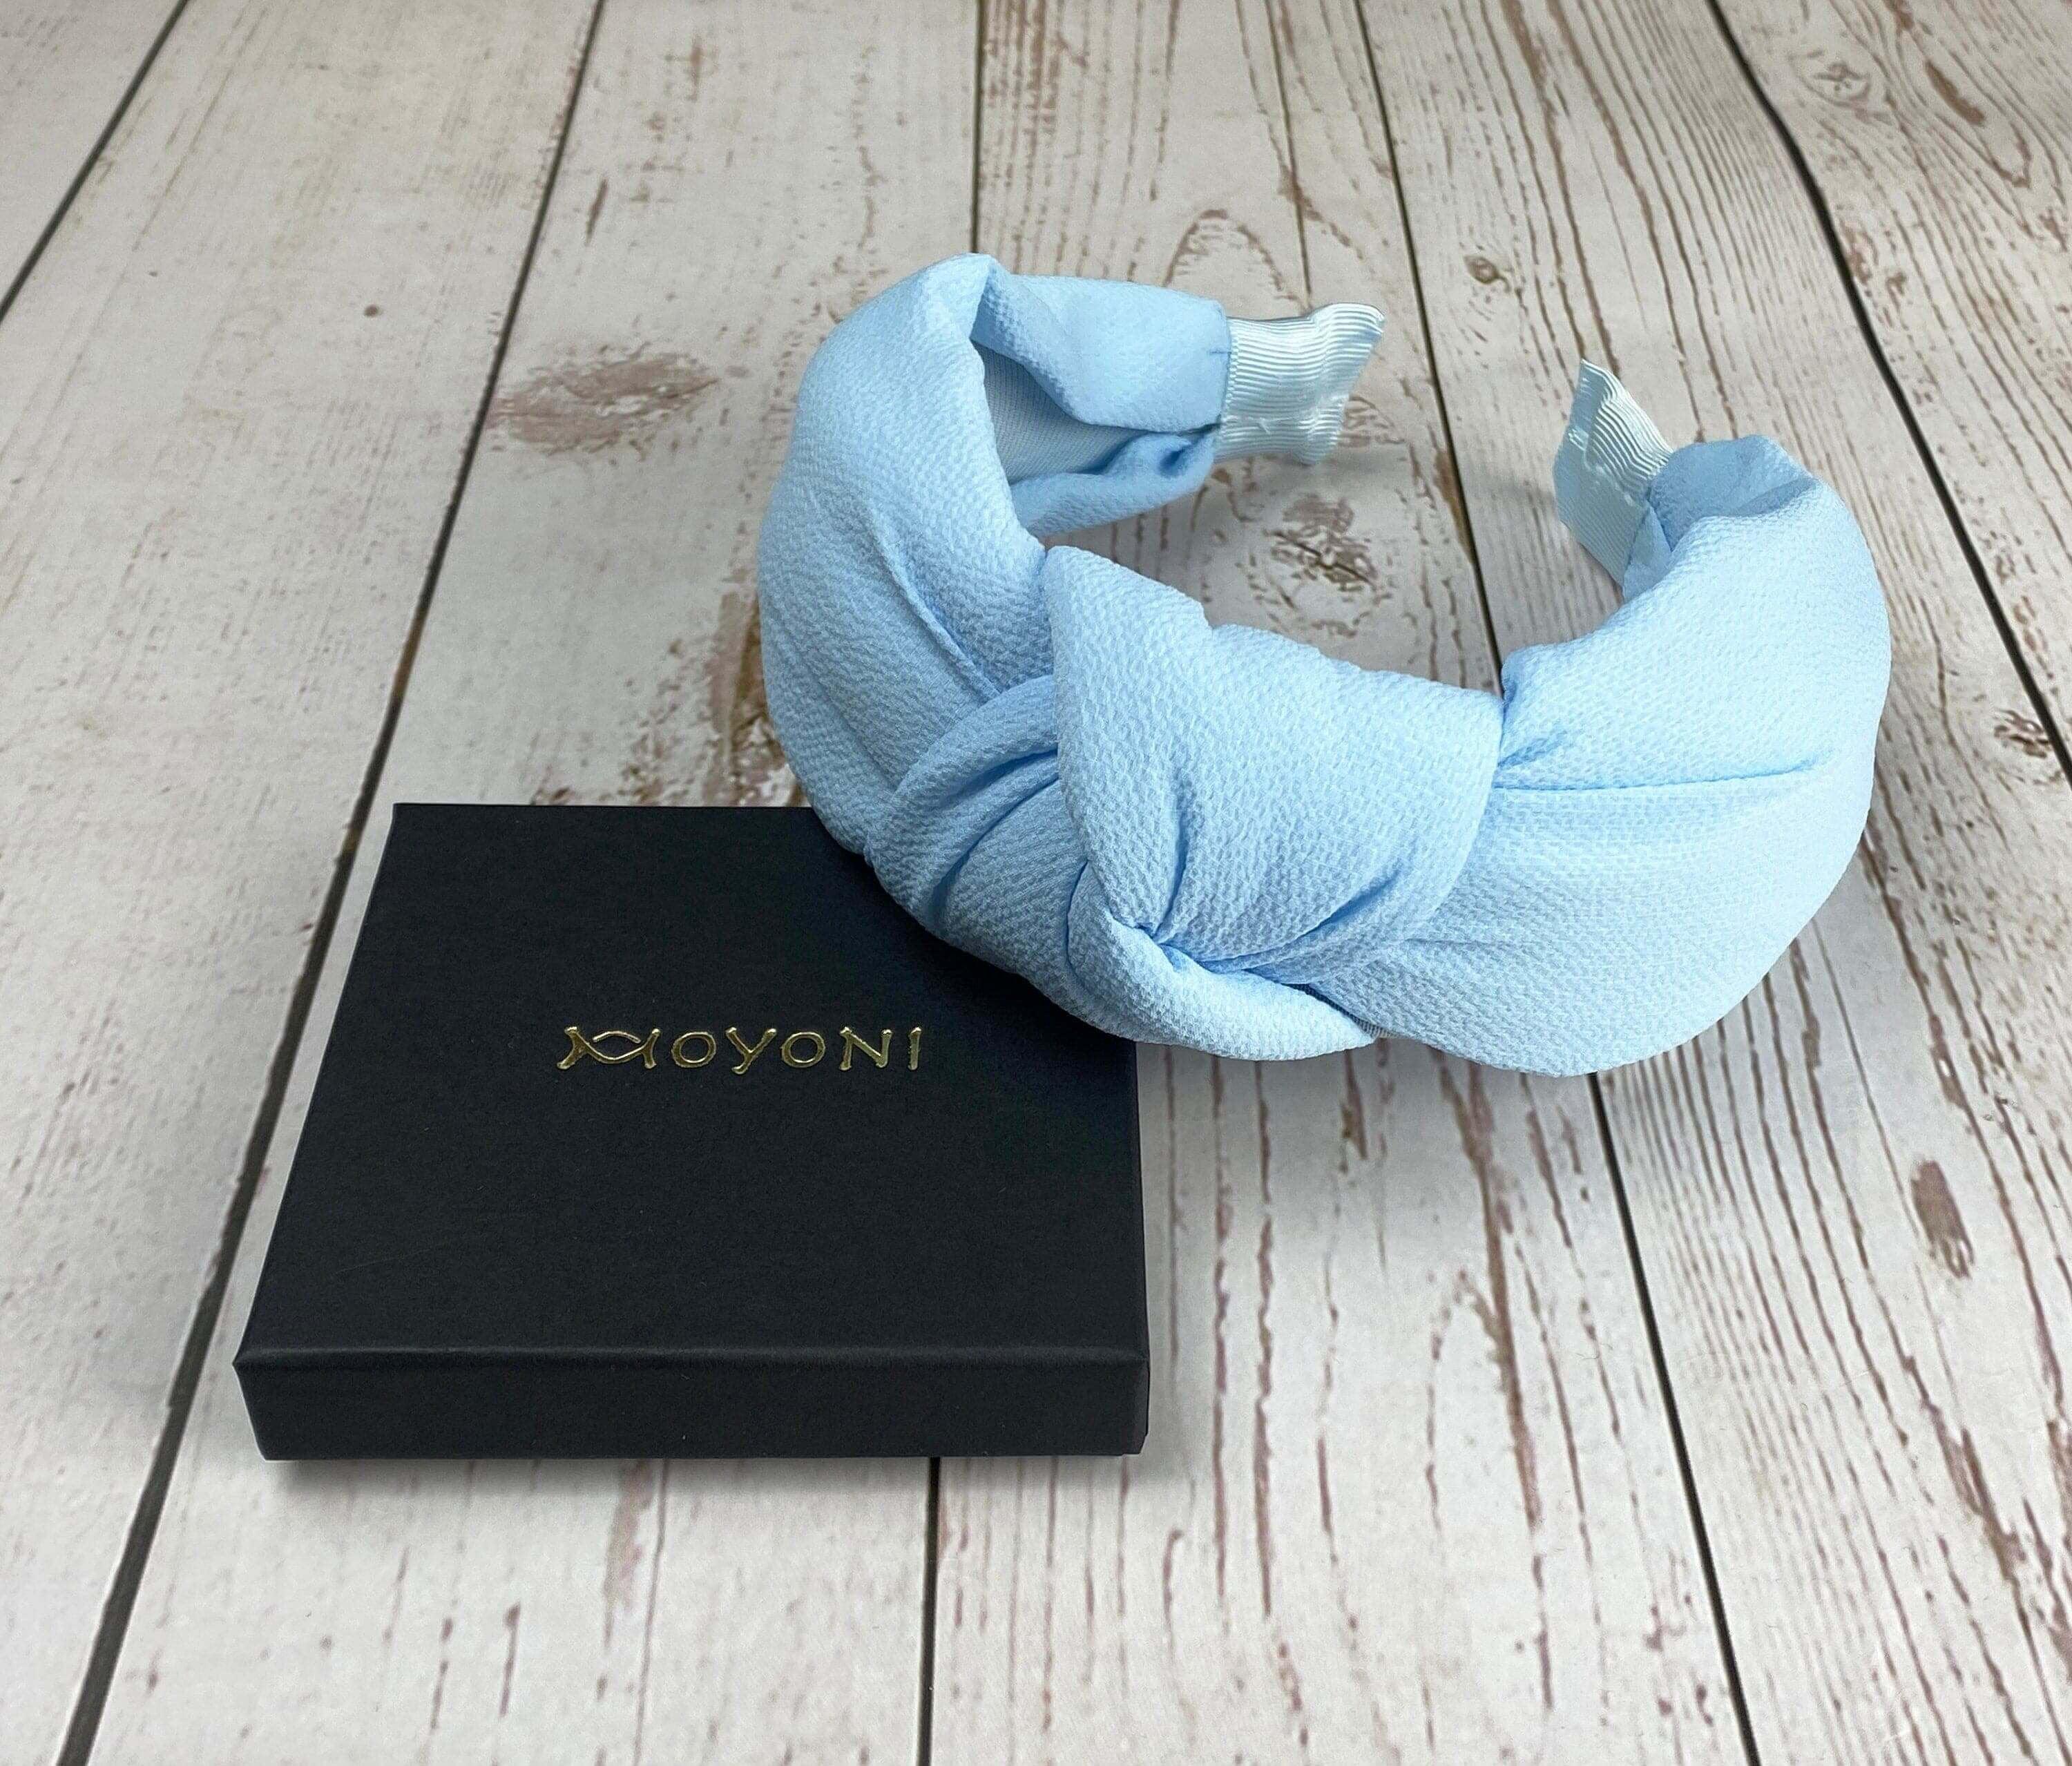 Unique Baby Blue Twist Knot Headband - Fashionable Women's Hairband with Viscose Crepe Padding available at Moyoni Design